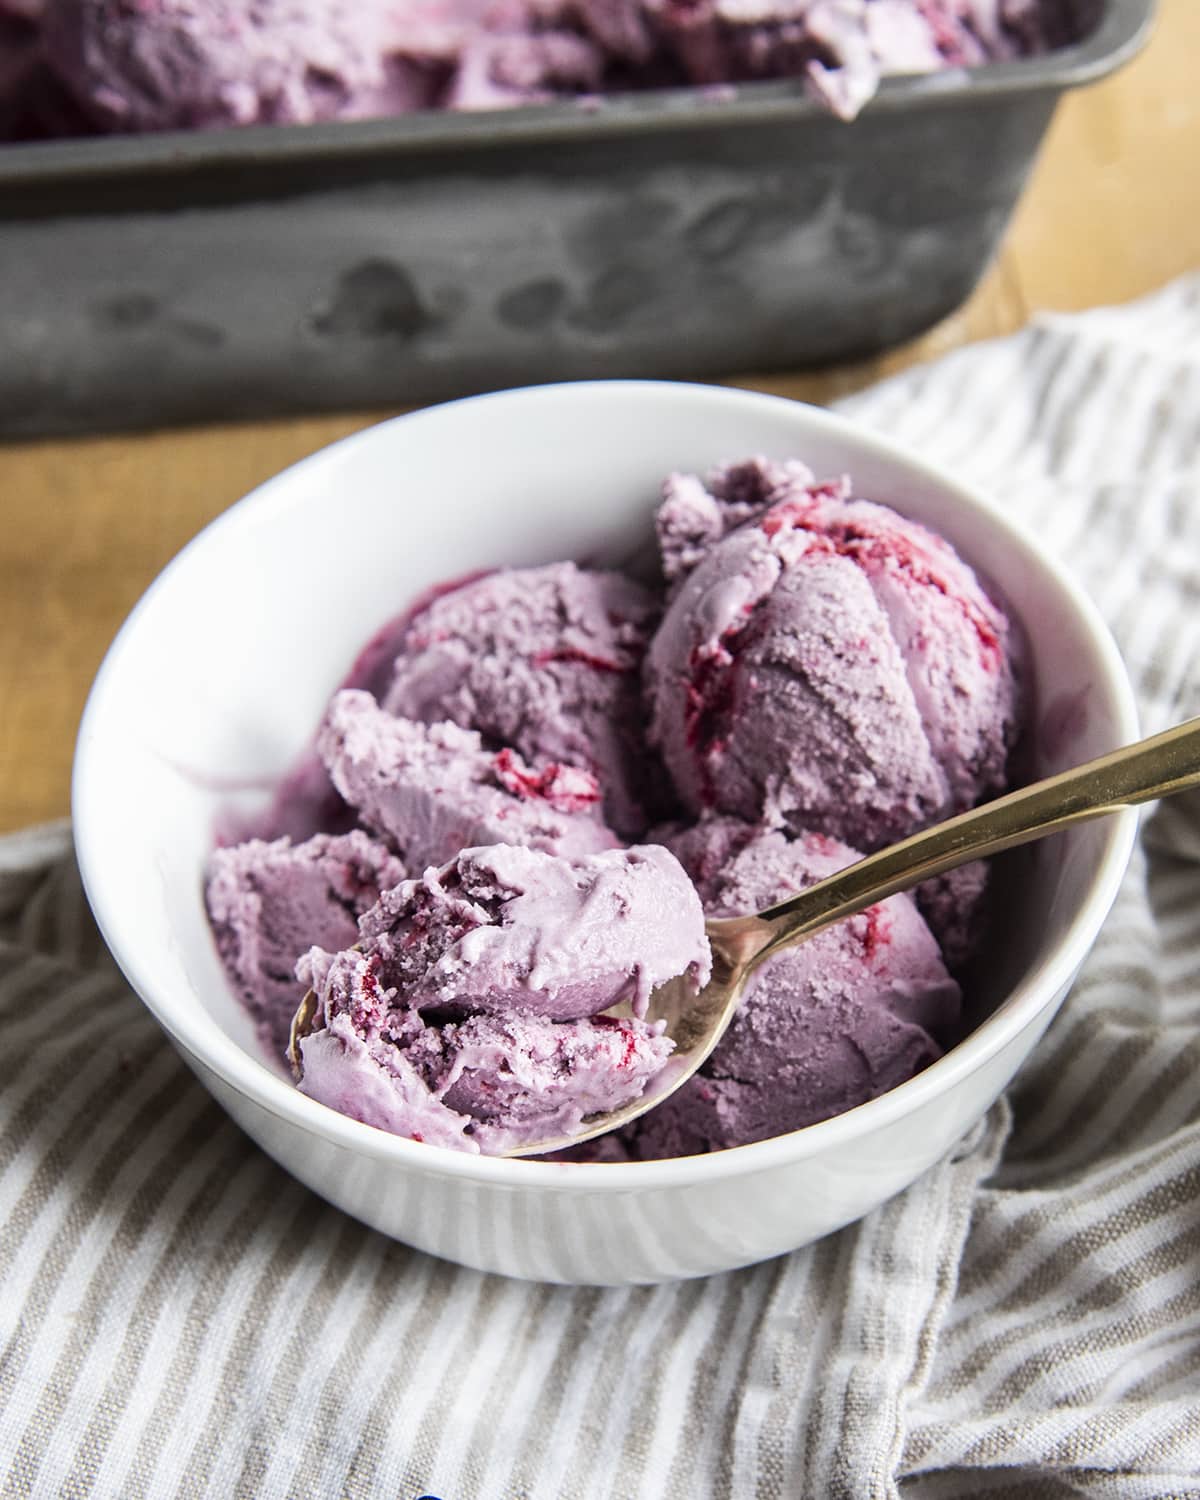 A bowl of purple blackberry ice cream with swirls of berries, and a spoonful of ice cream in a golden spoon.